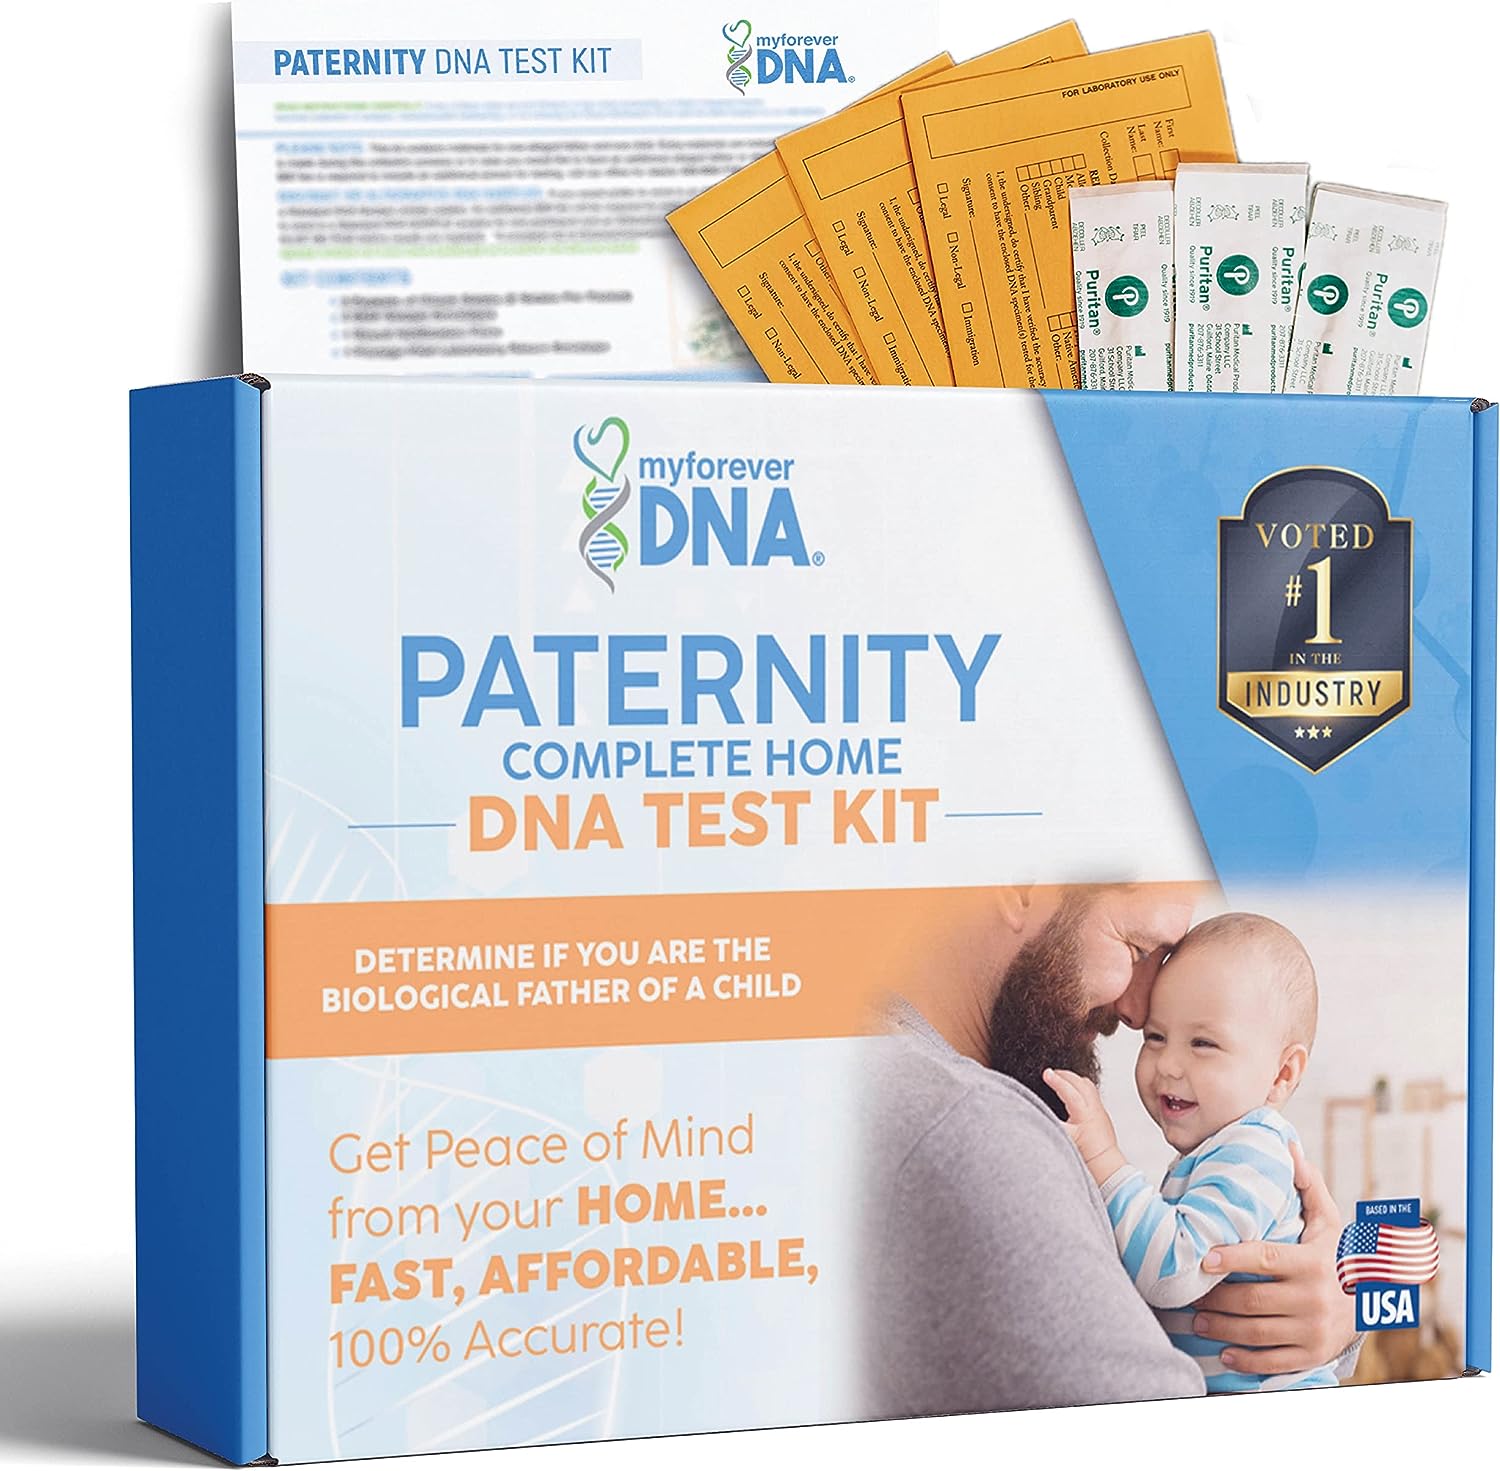 my forever dna paternity dna test kit includes all lab fees shipping to lab up to 34 dna genetic markers tested accurate